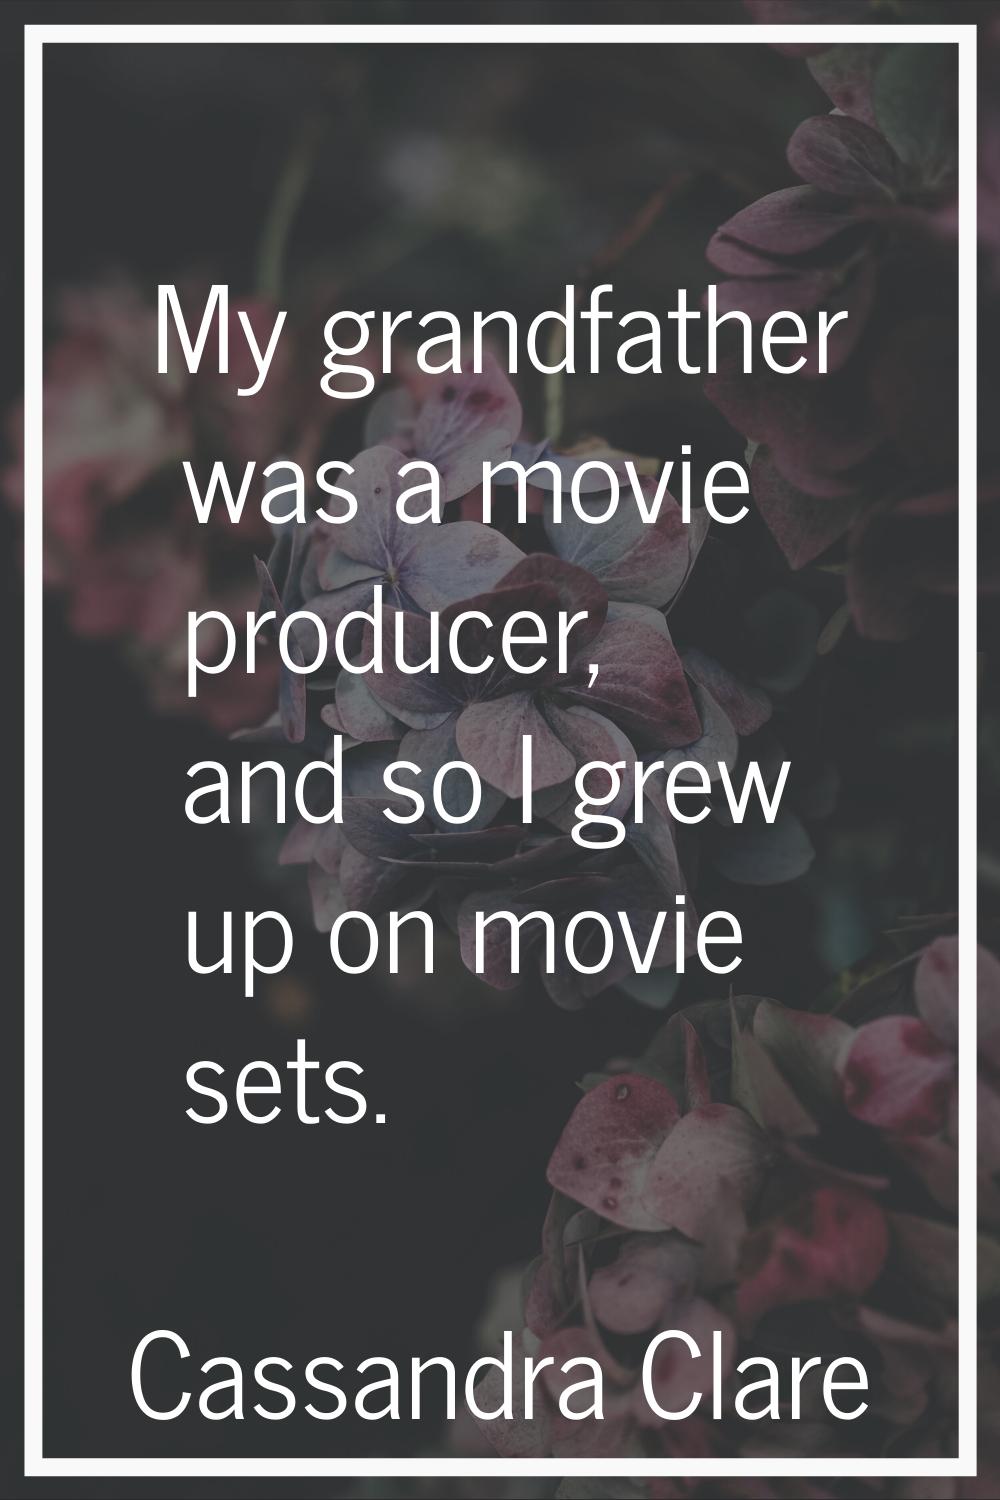 My grandfather was a movie producer, and so I grew up on movie sets.